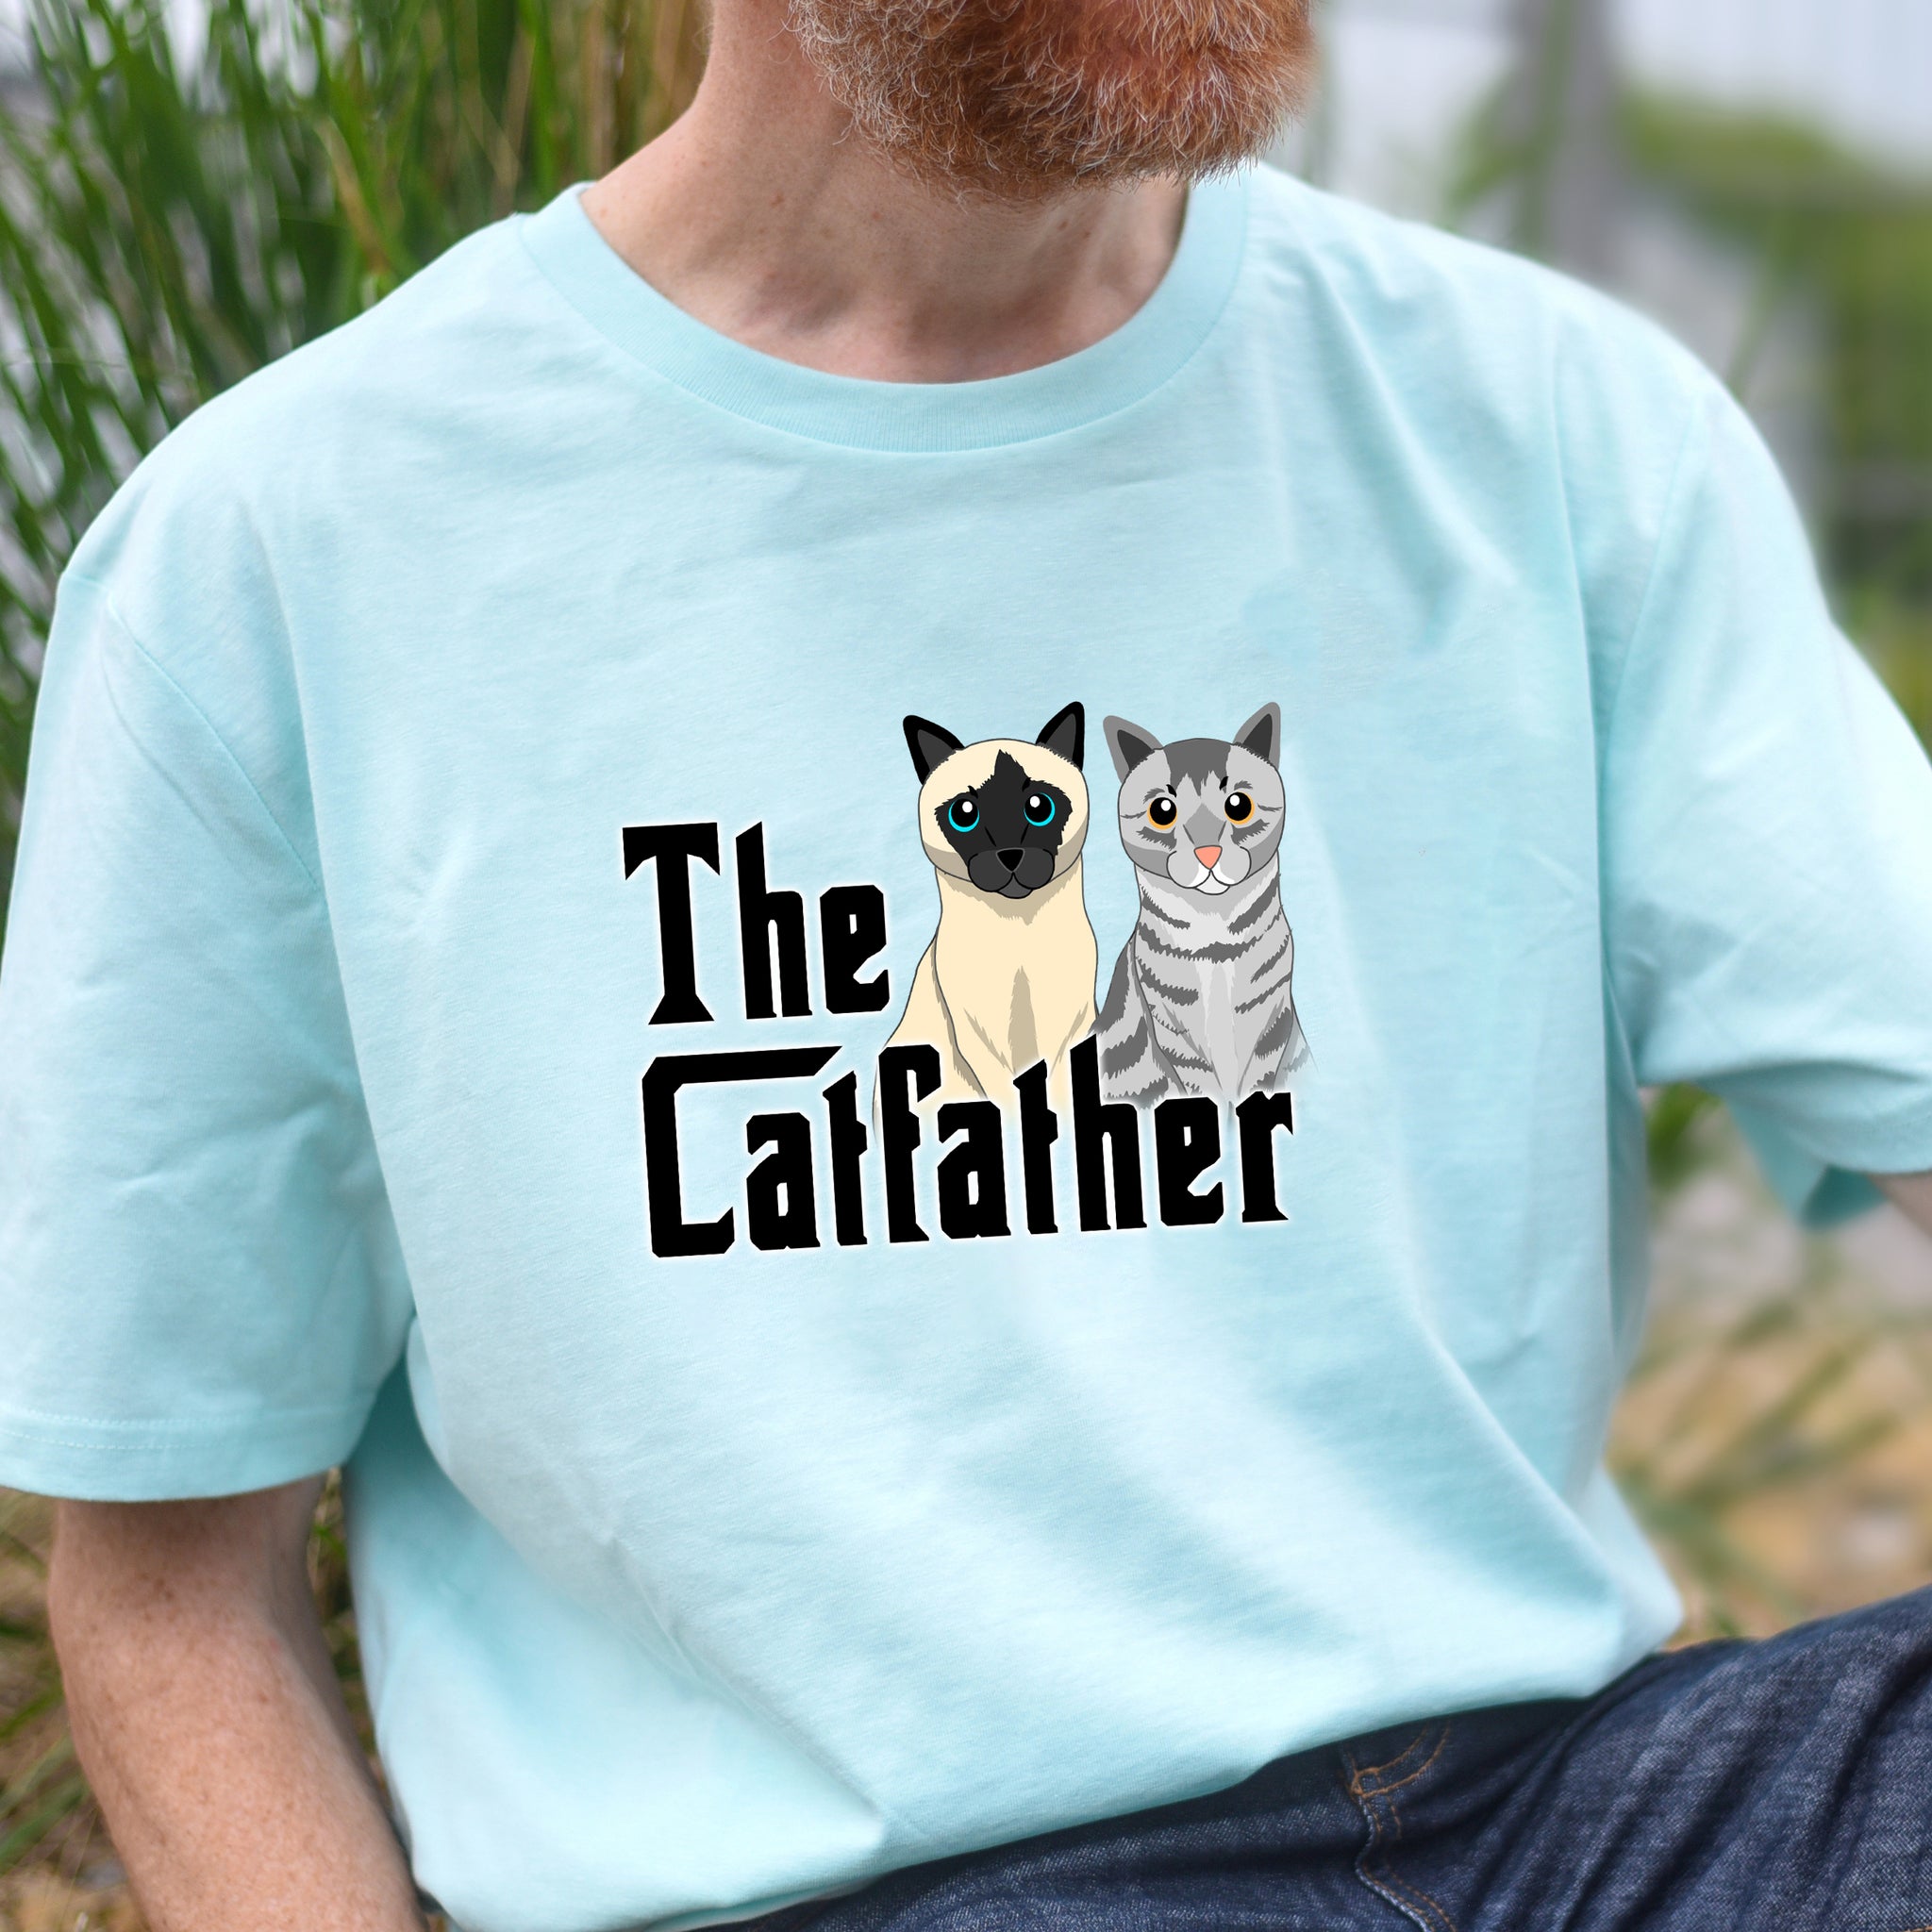 Catfather Illustrated T-shirt